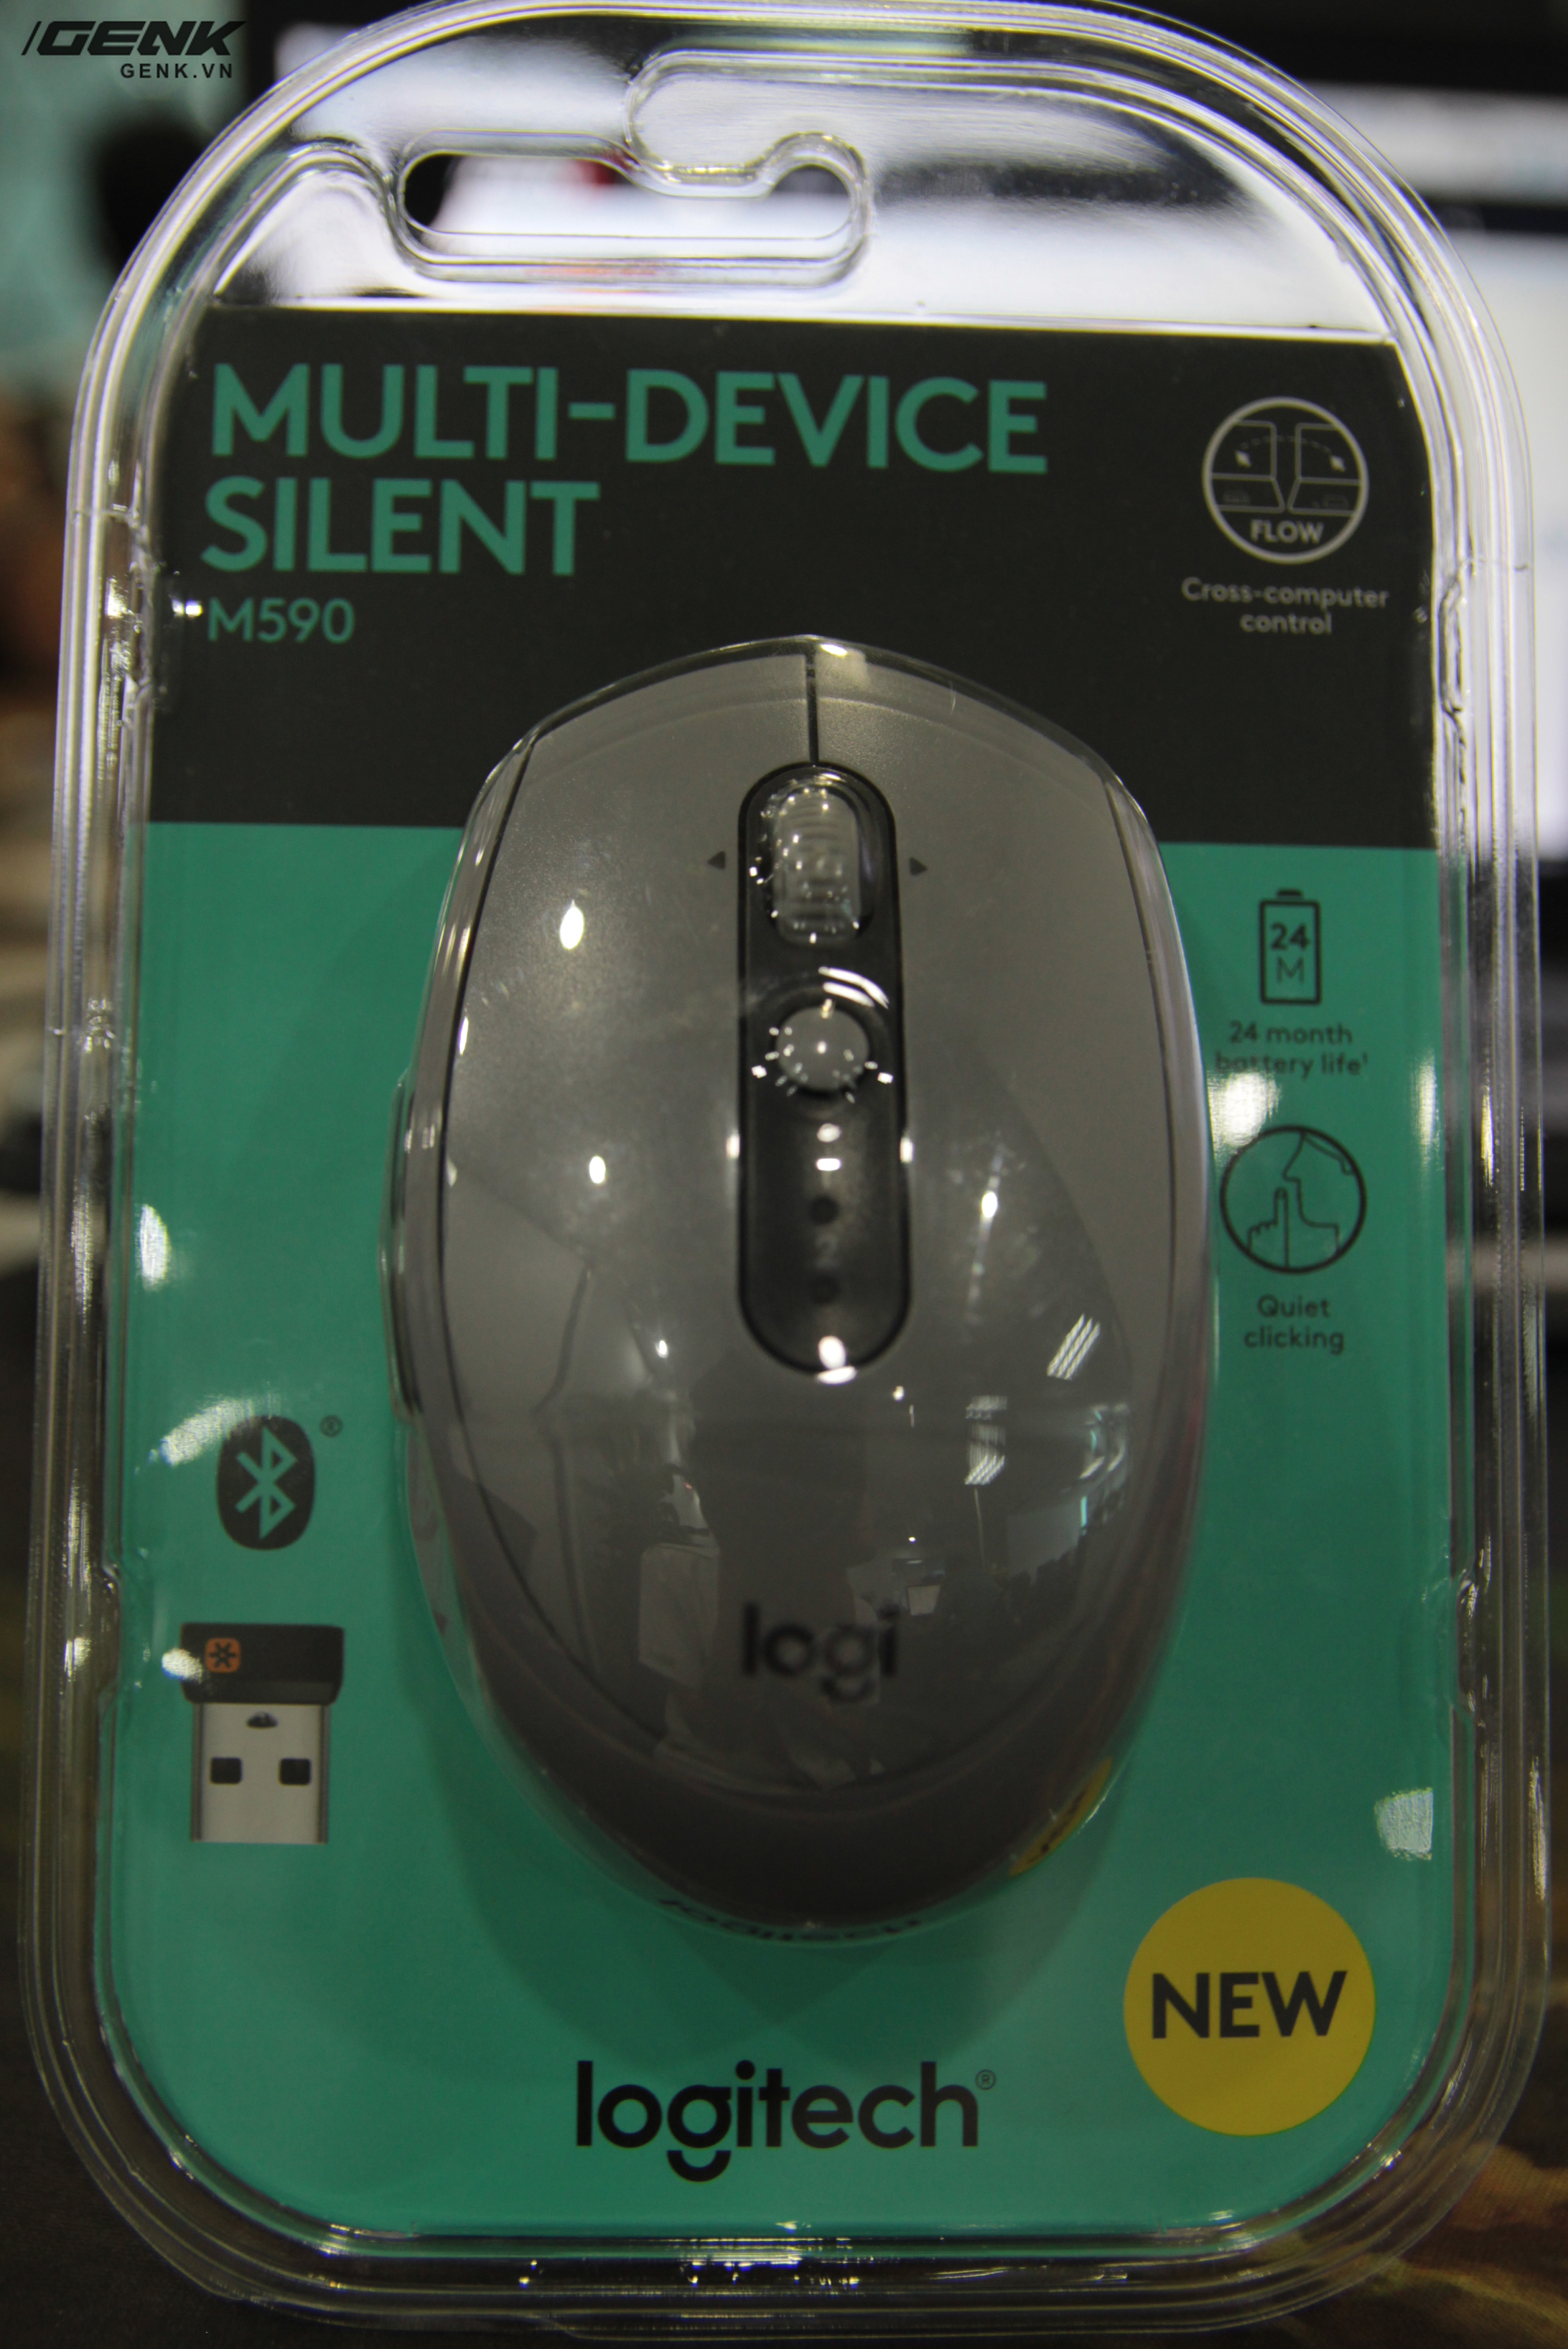 how to link logitech m590 mouse